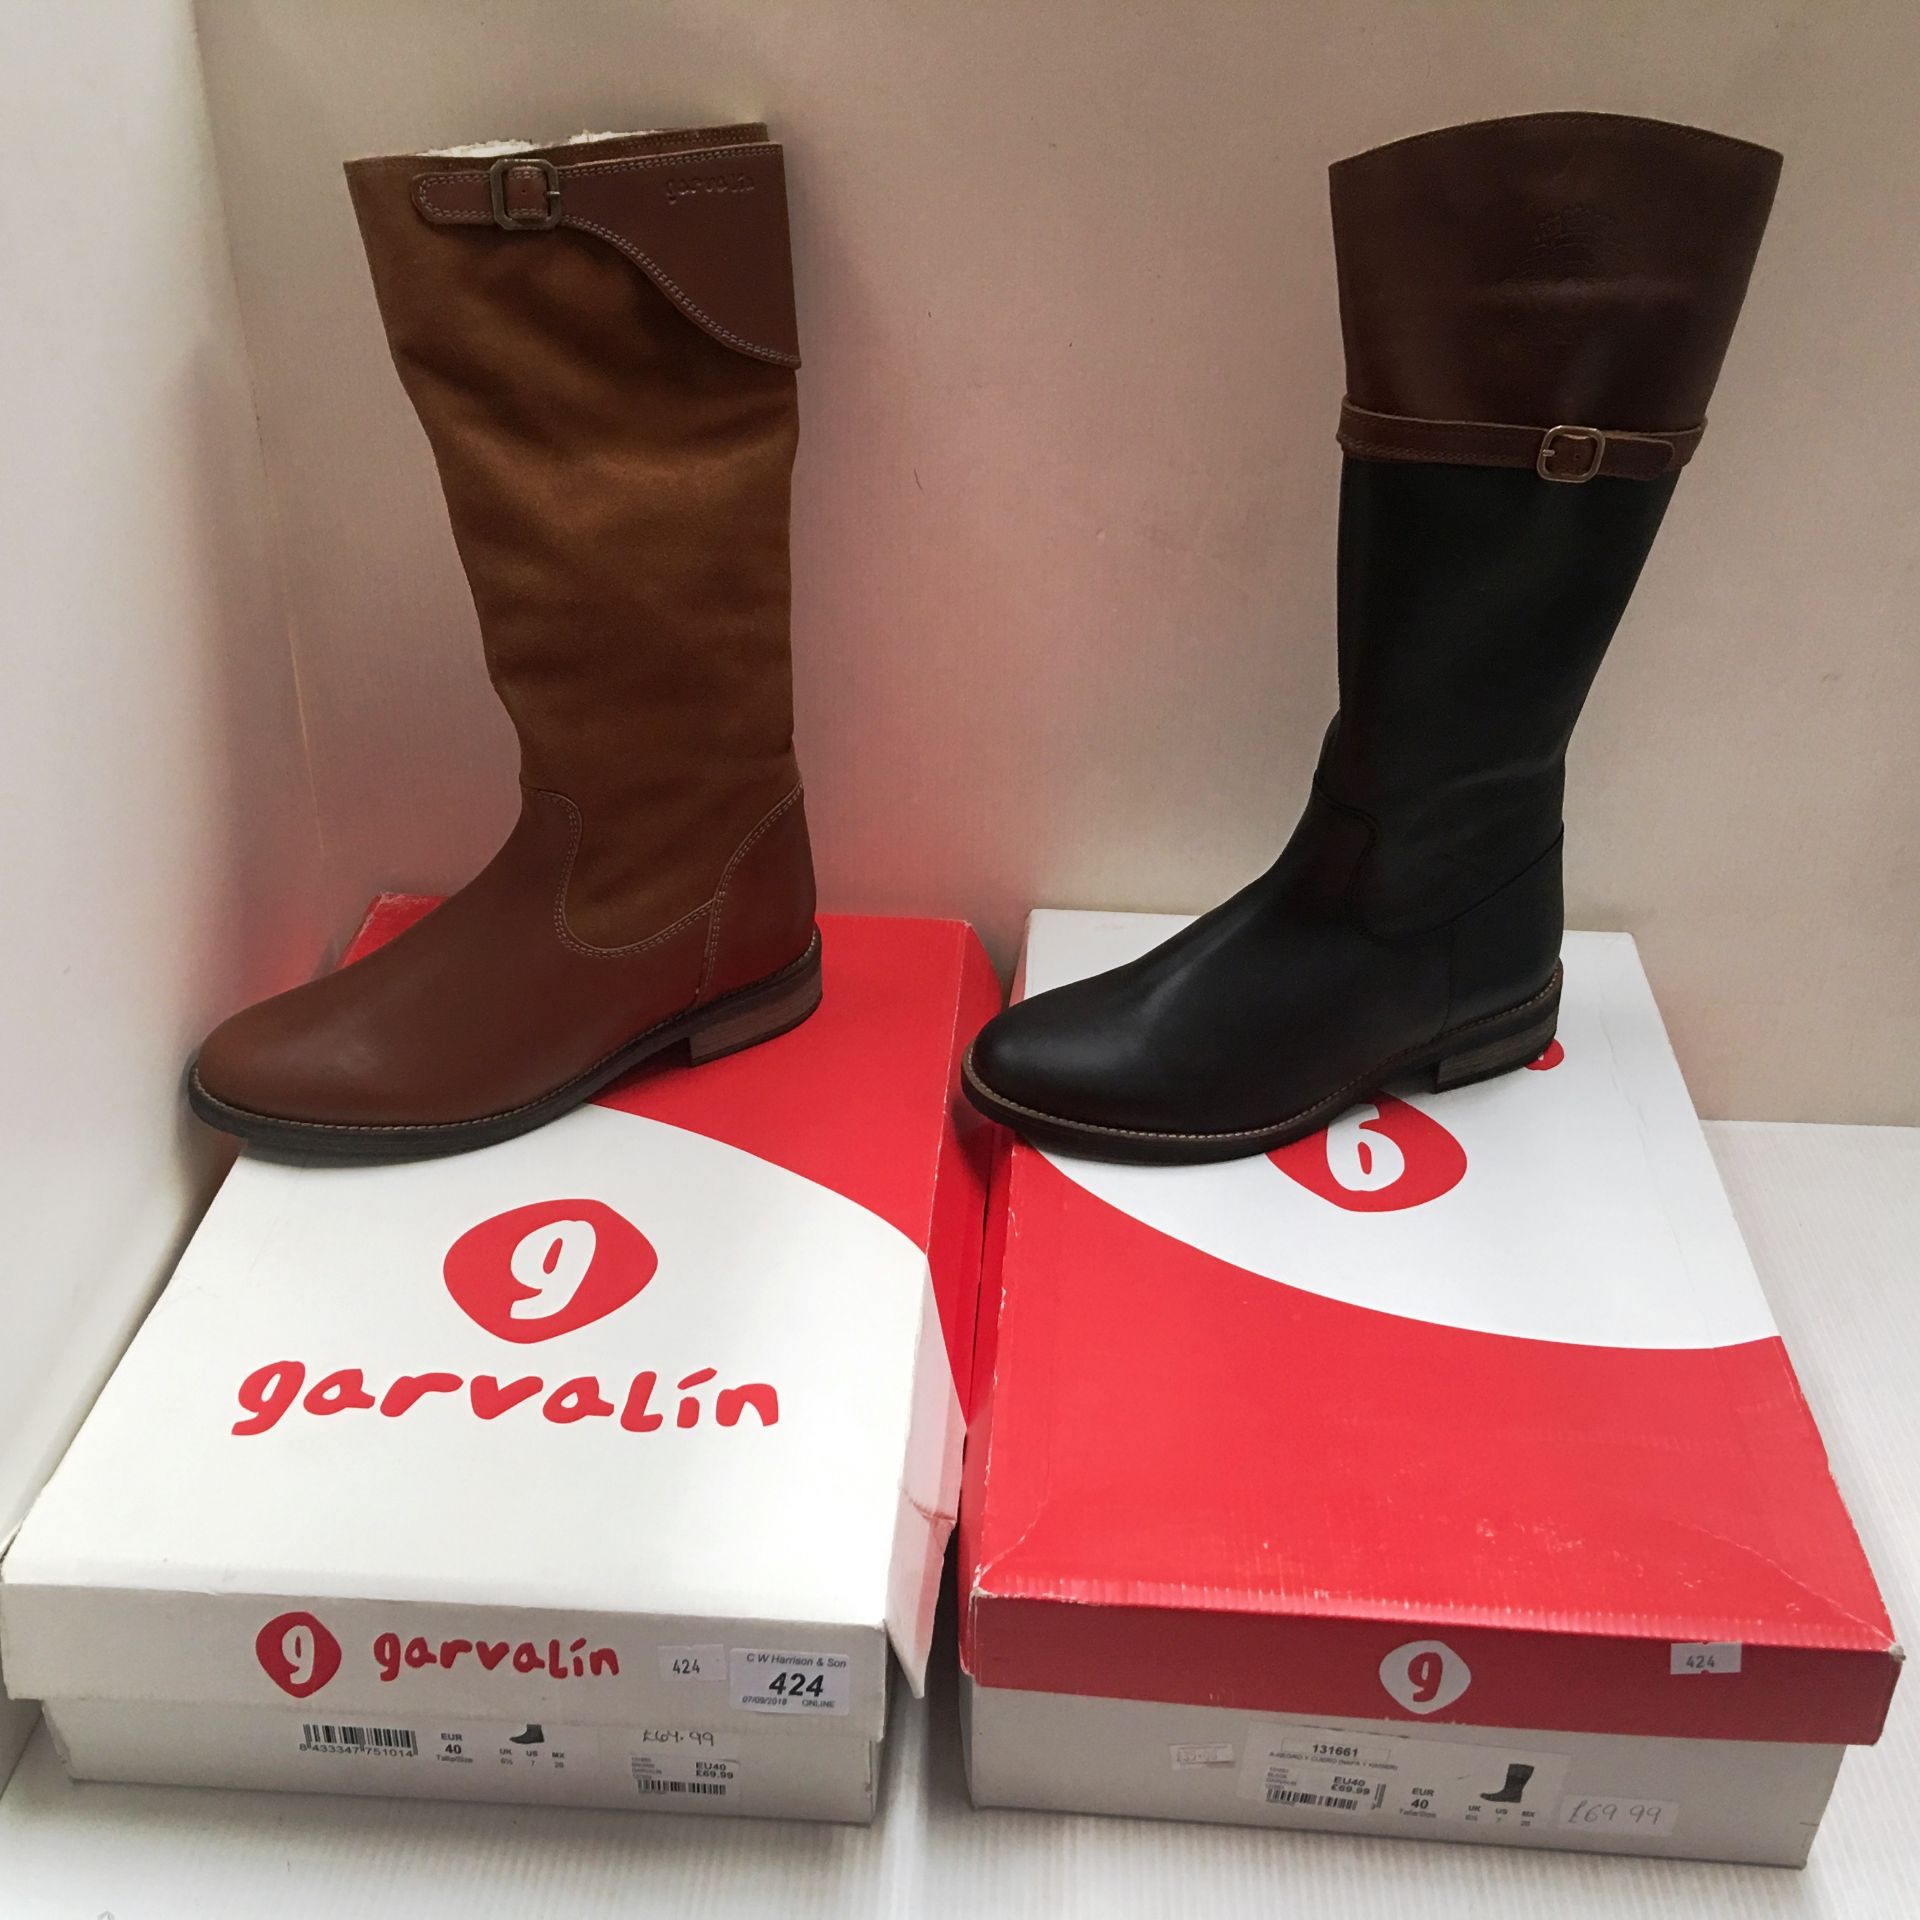 2 x pairs of adult's boots - Garvalin -